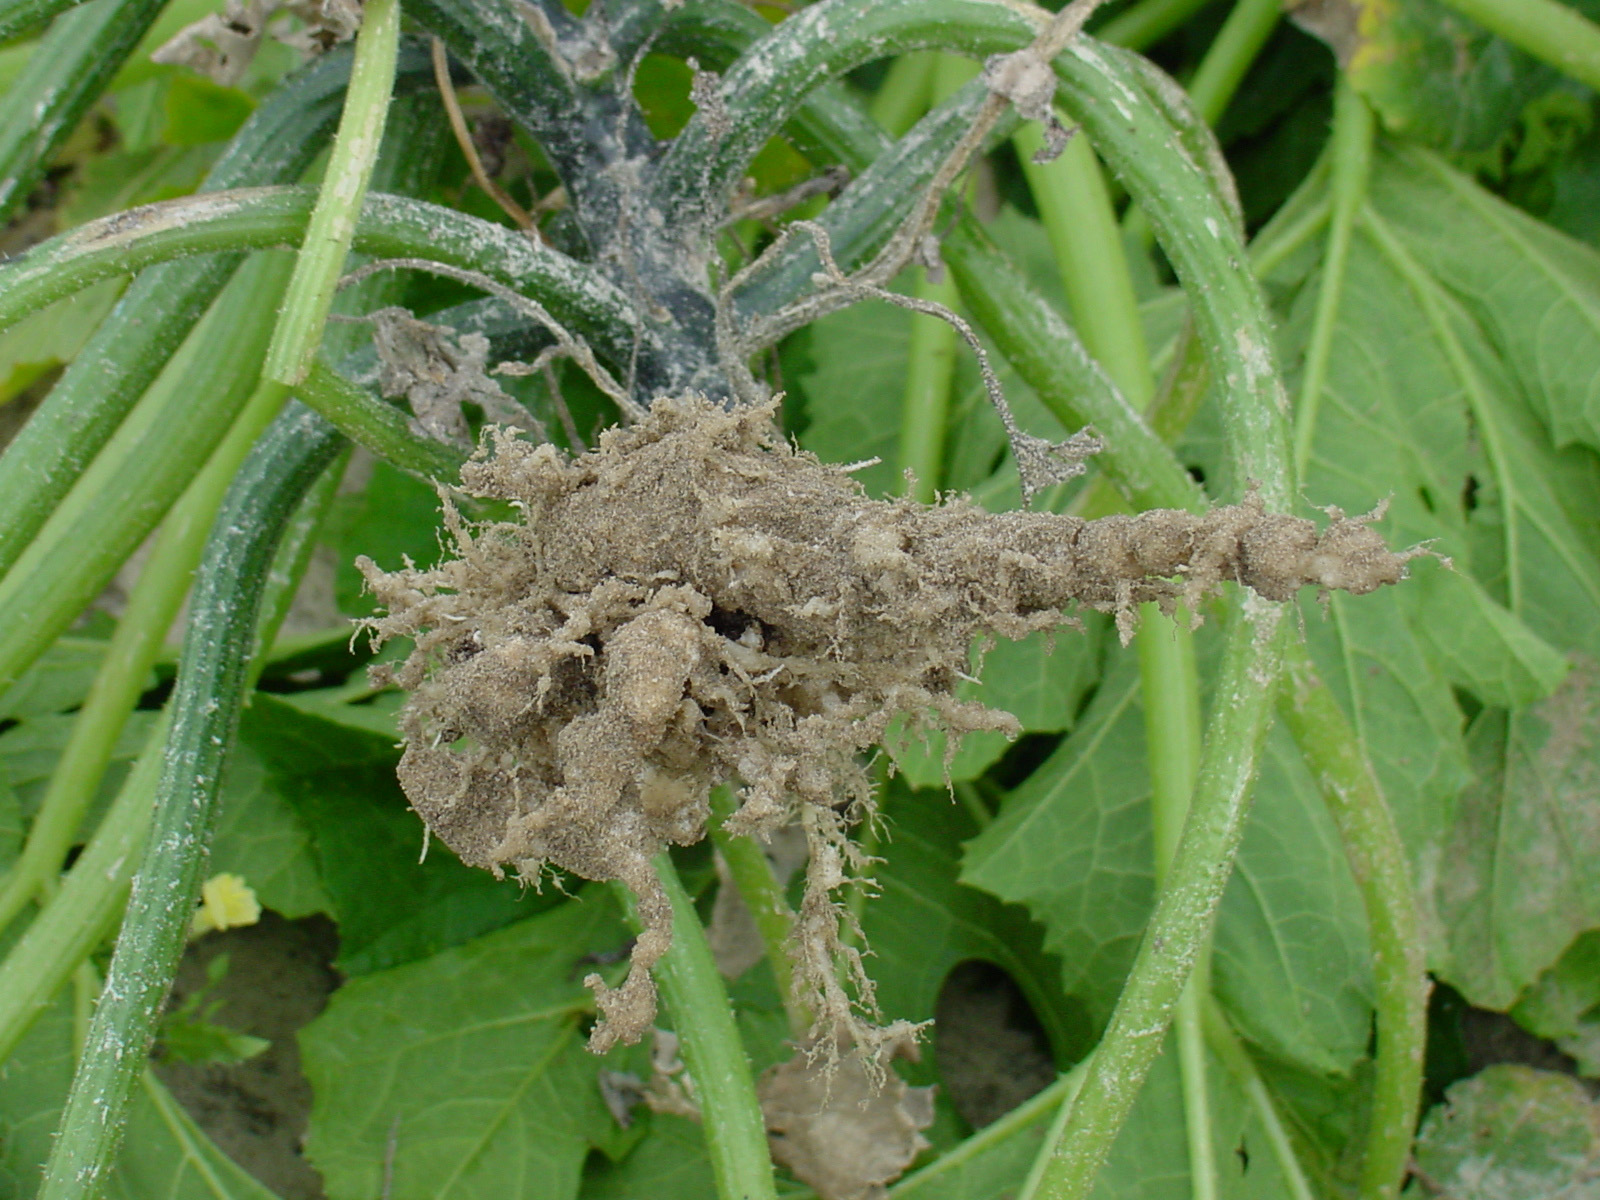 Root-knot nematode on summer squash roots.